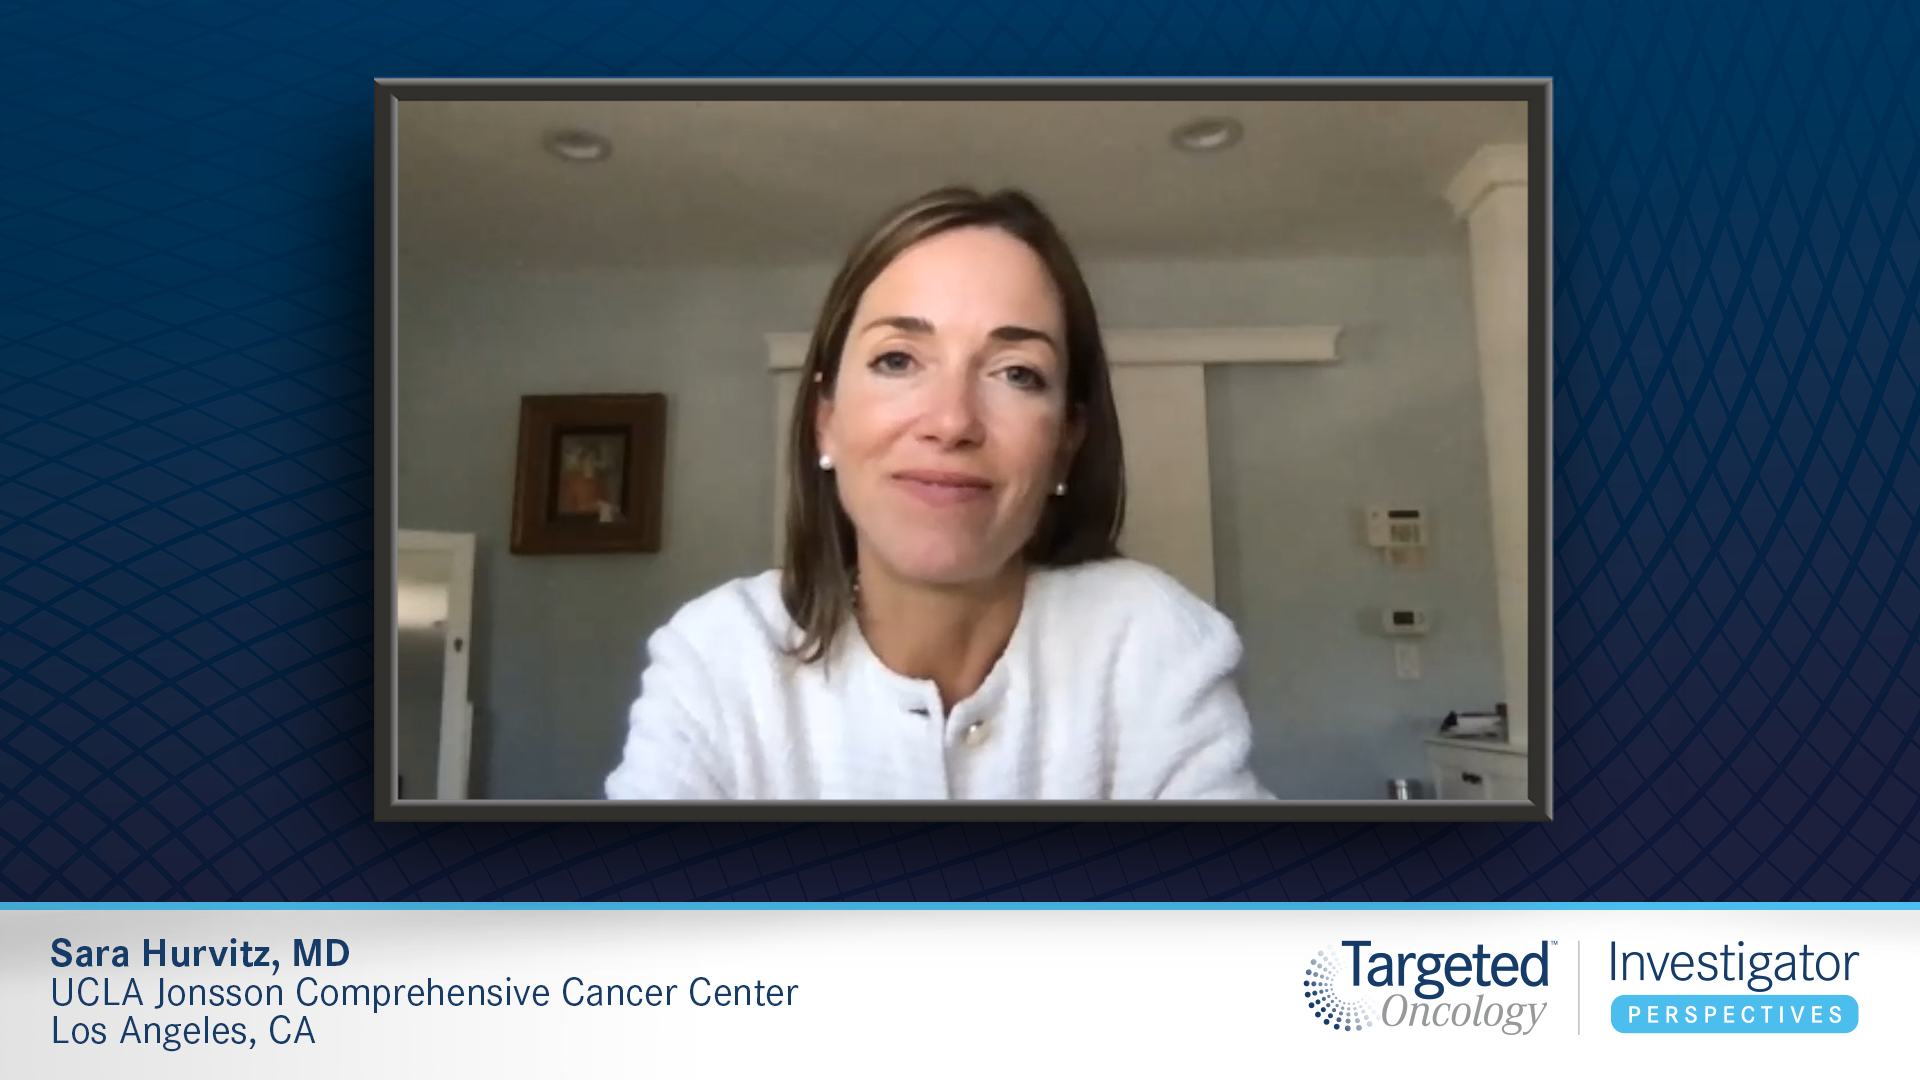 Treatment Options For Advanced ER+ Breast Cancer - Targeted Oncology